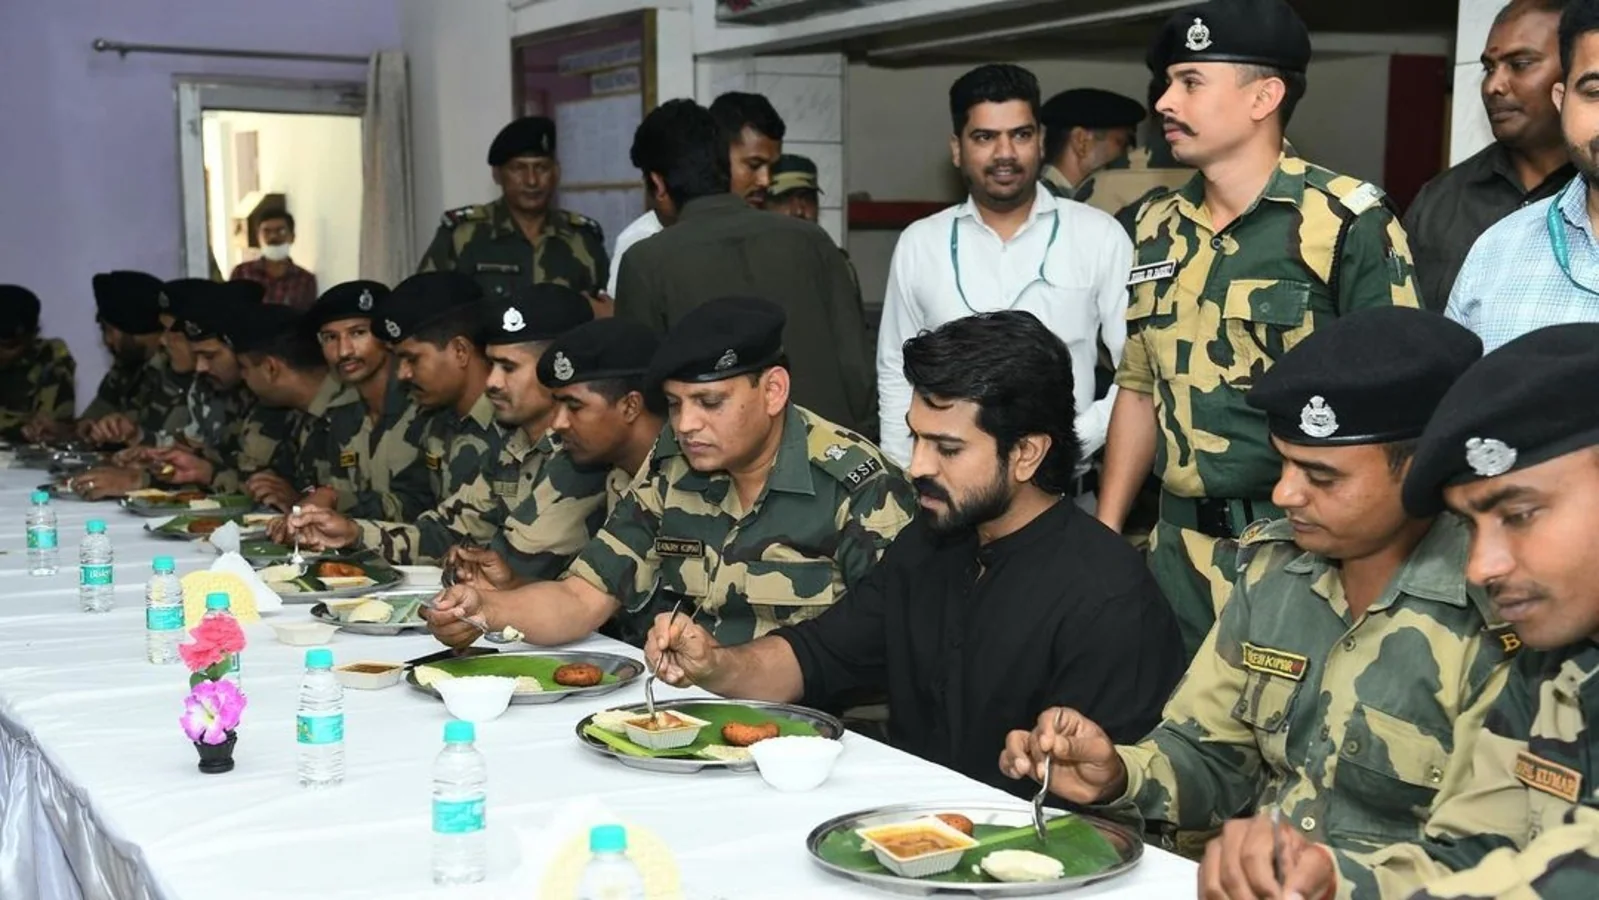 Ram Charan poses with BSF soldiers, gets his personal chef to cook for them: ‘Inspiring afternoon spent’. See pics